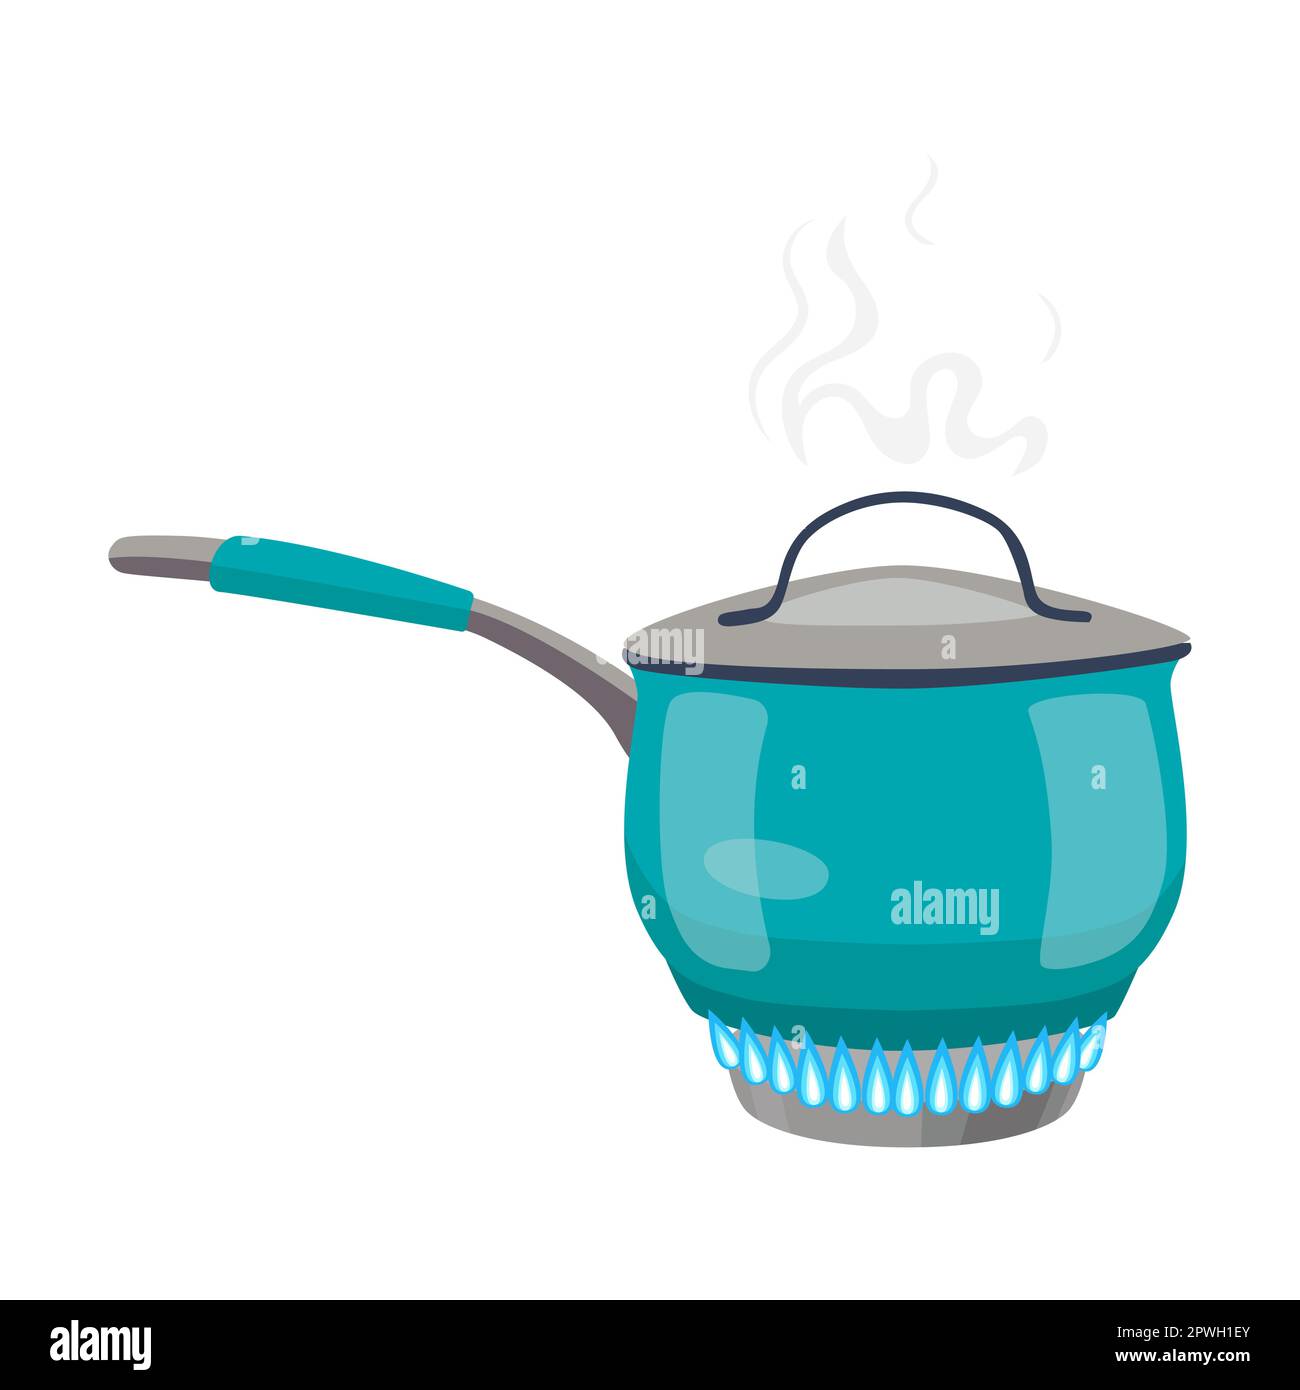 https://c8.alamy.com/comp/2PWH1EY/cooking-pot-on-gas-stove-cartoon-illustration-boiling-water-in-kettle-frying-dishes-on-fire-saucepan-with-hot-soup-2PWH1EY.jpg